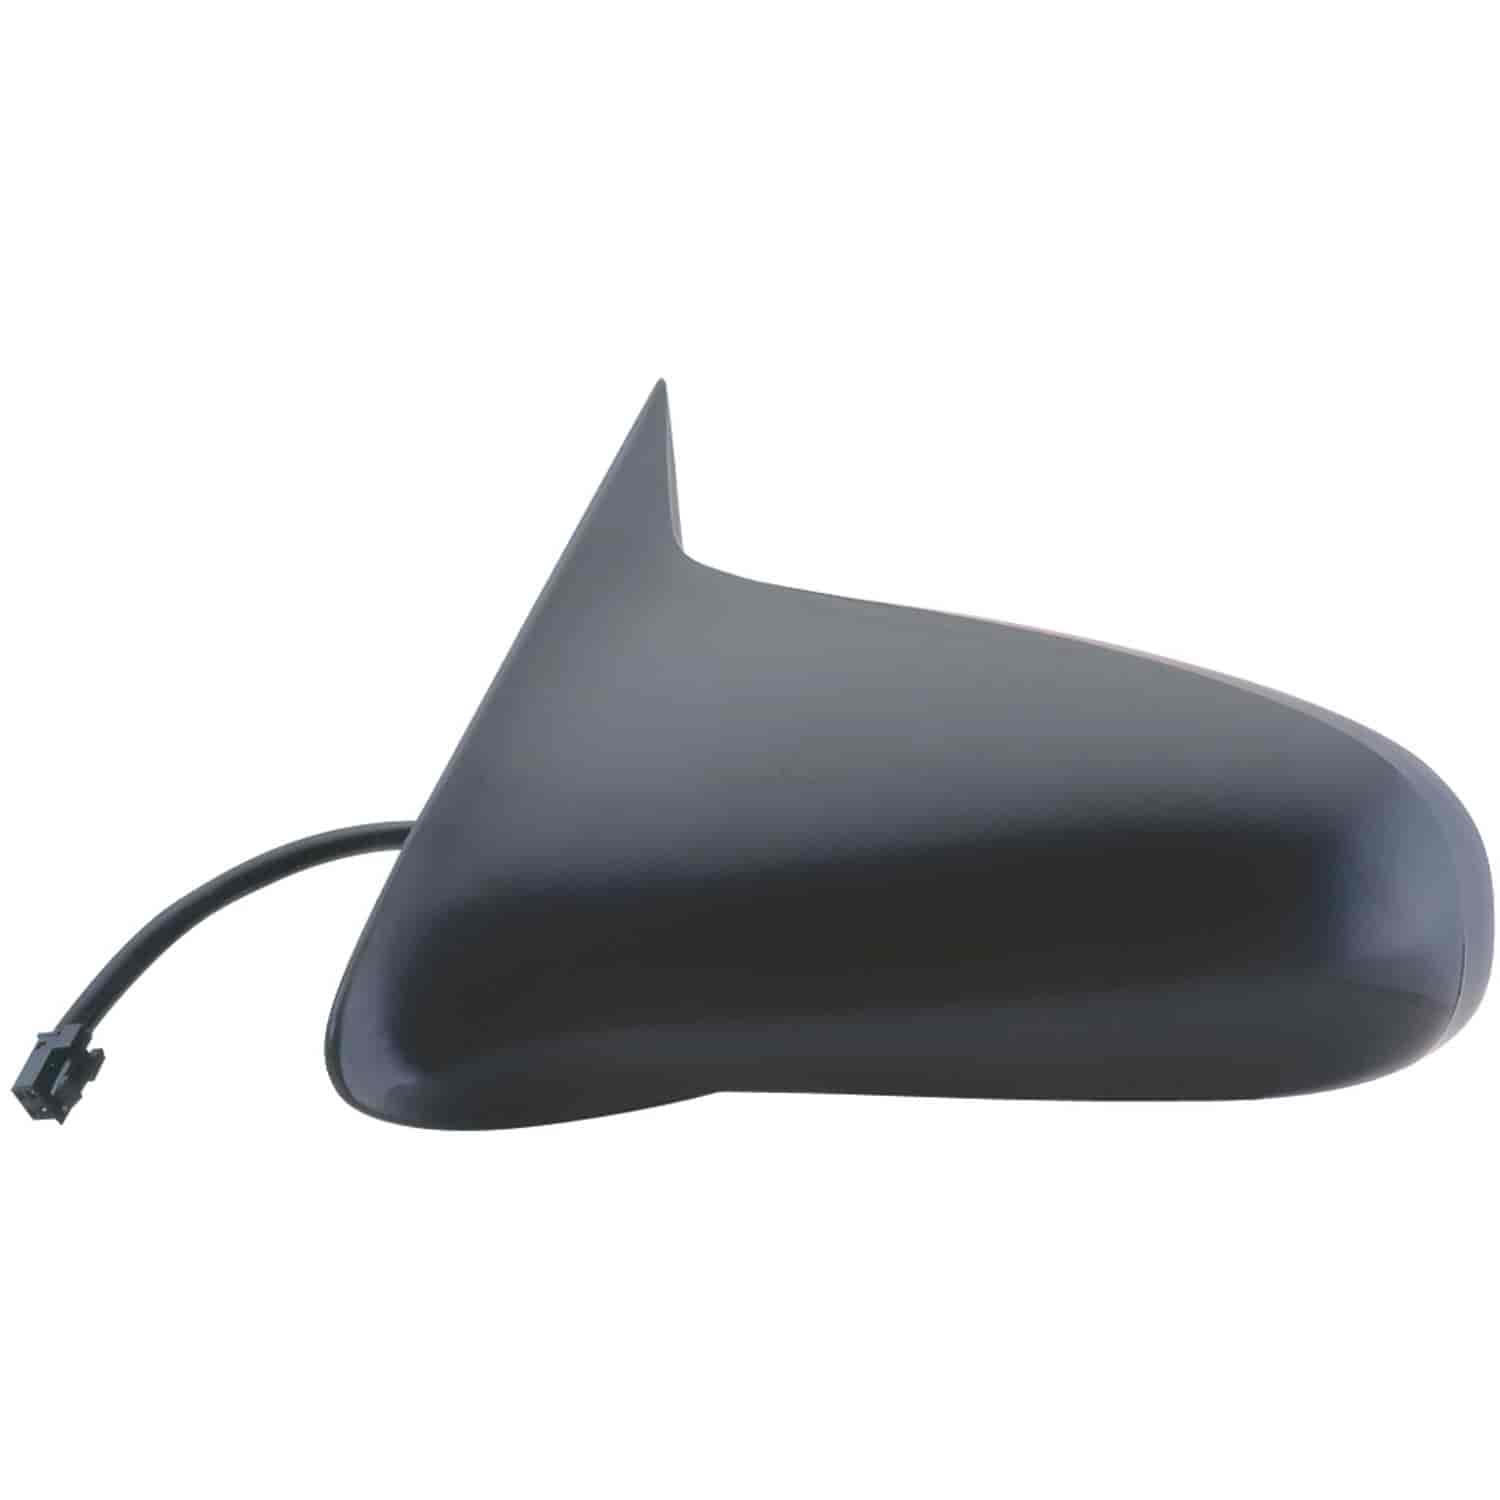 OEM Style Replacement mirror for 95-99 Chevrolet Monte Carlo driver side mirror tested to fit and fu